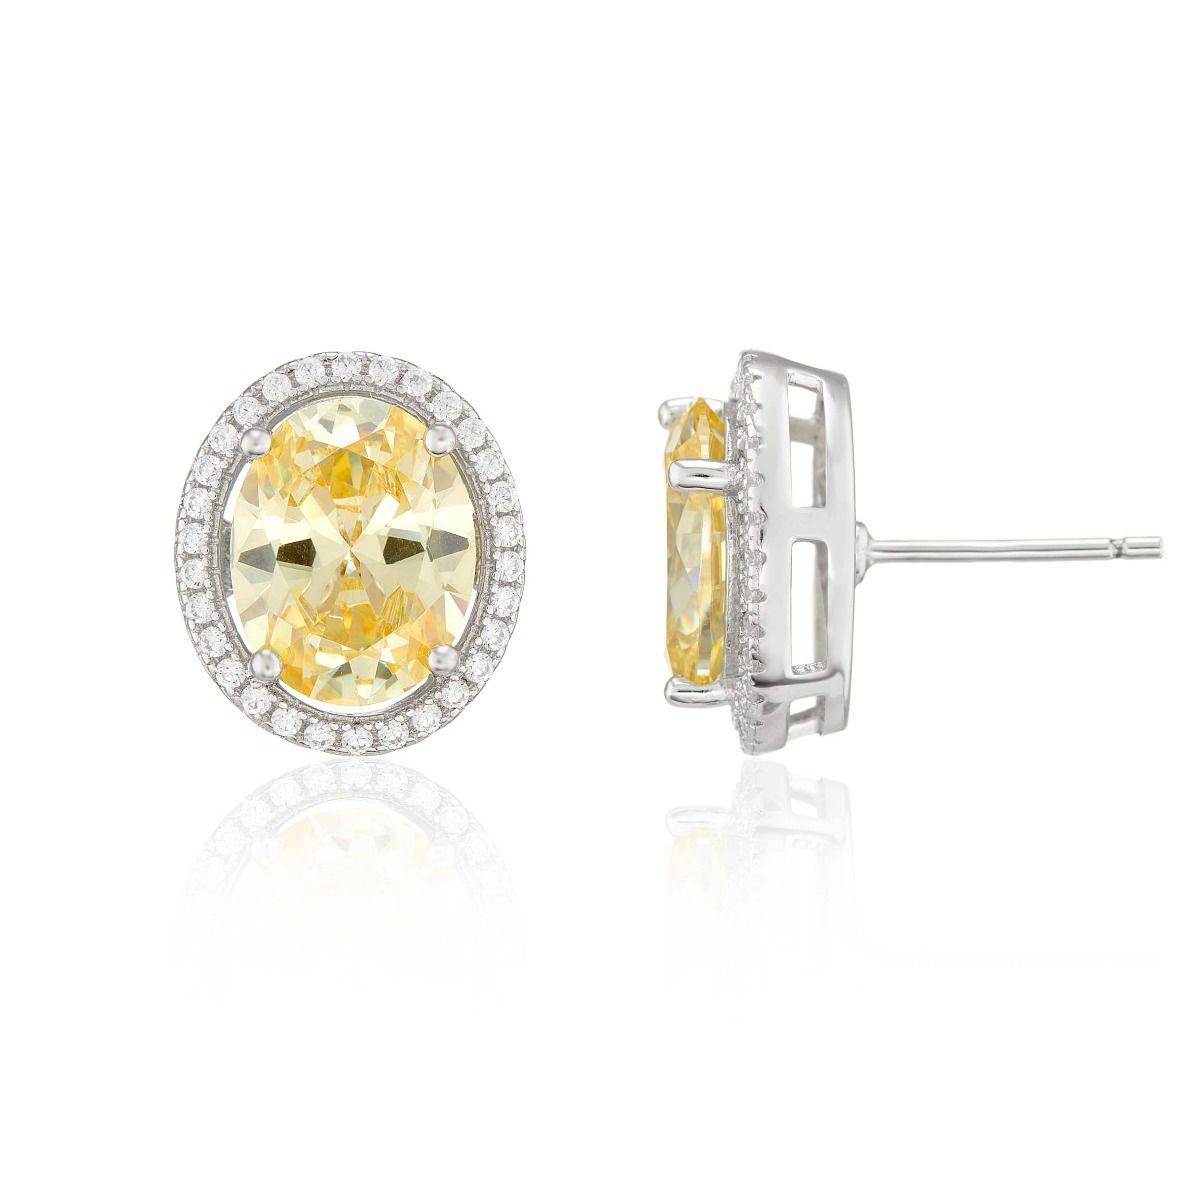 BUCKLEY LONDON The Flawless Collection - Canary Oval Halo Earrings